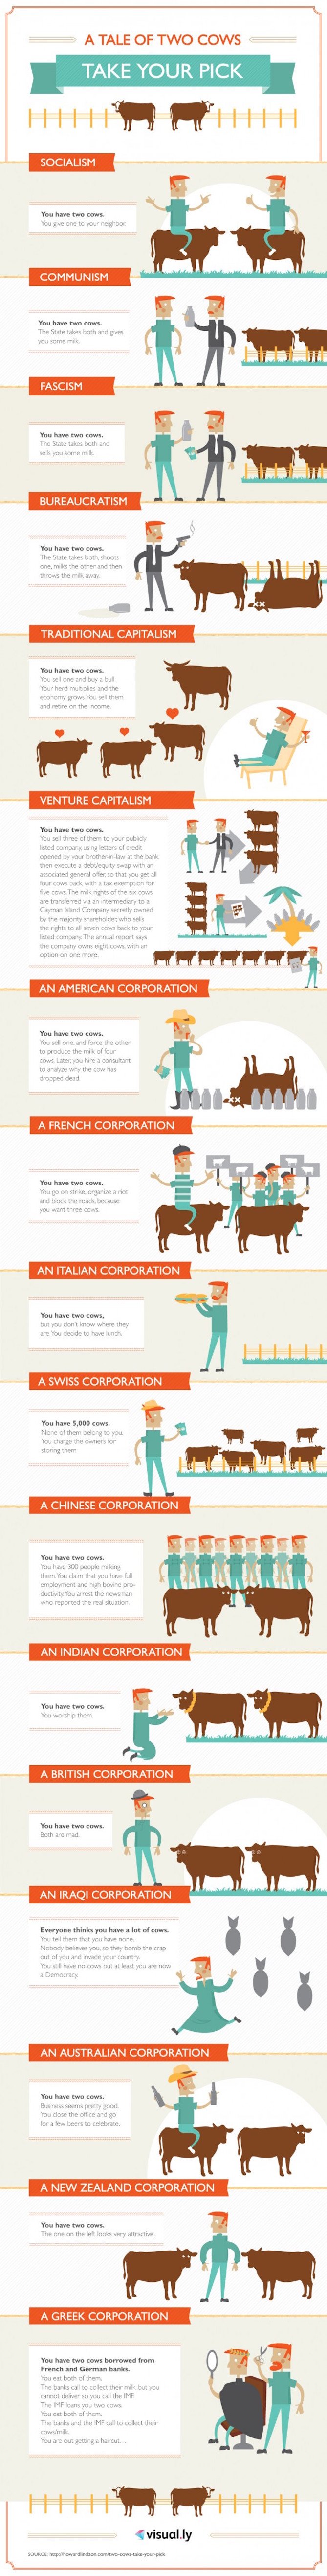 tale-of-two-cows-infographic.jpg